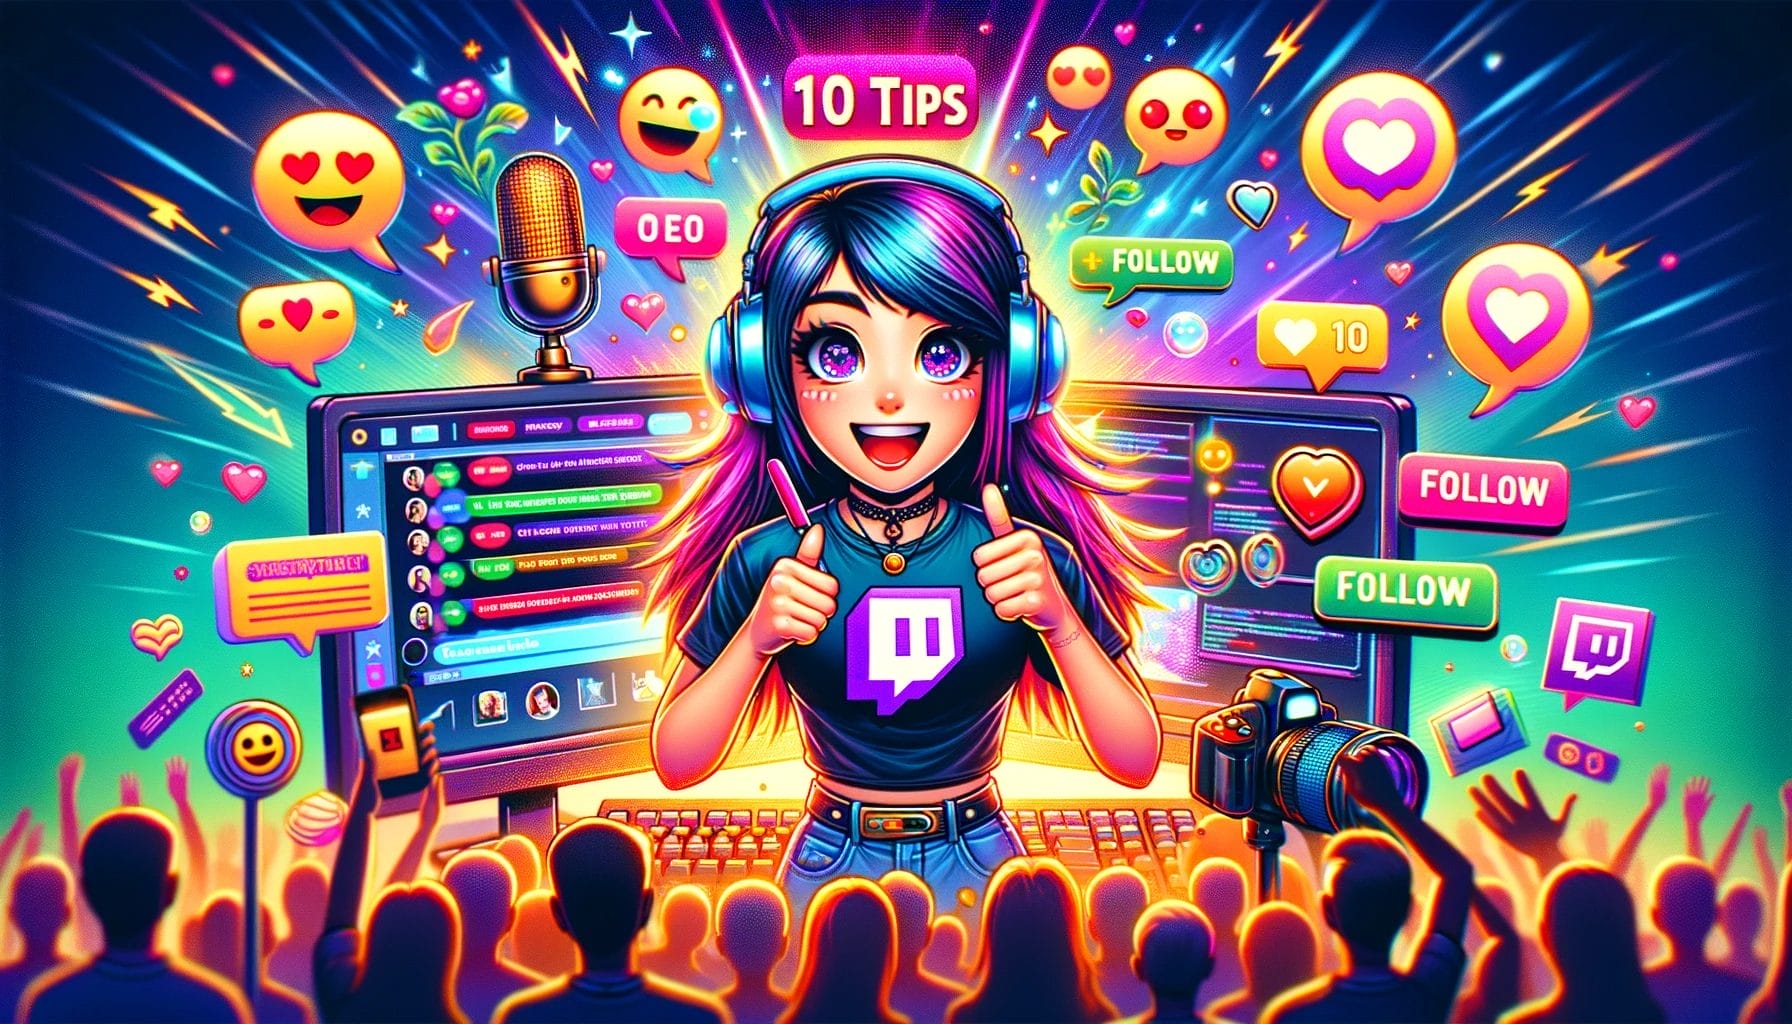 Top Twitch Streamers Setting the Standard for Gaming Content